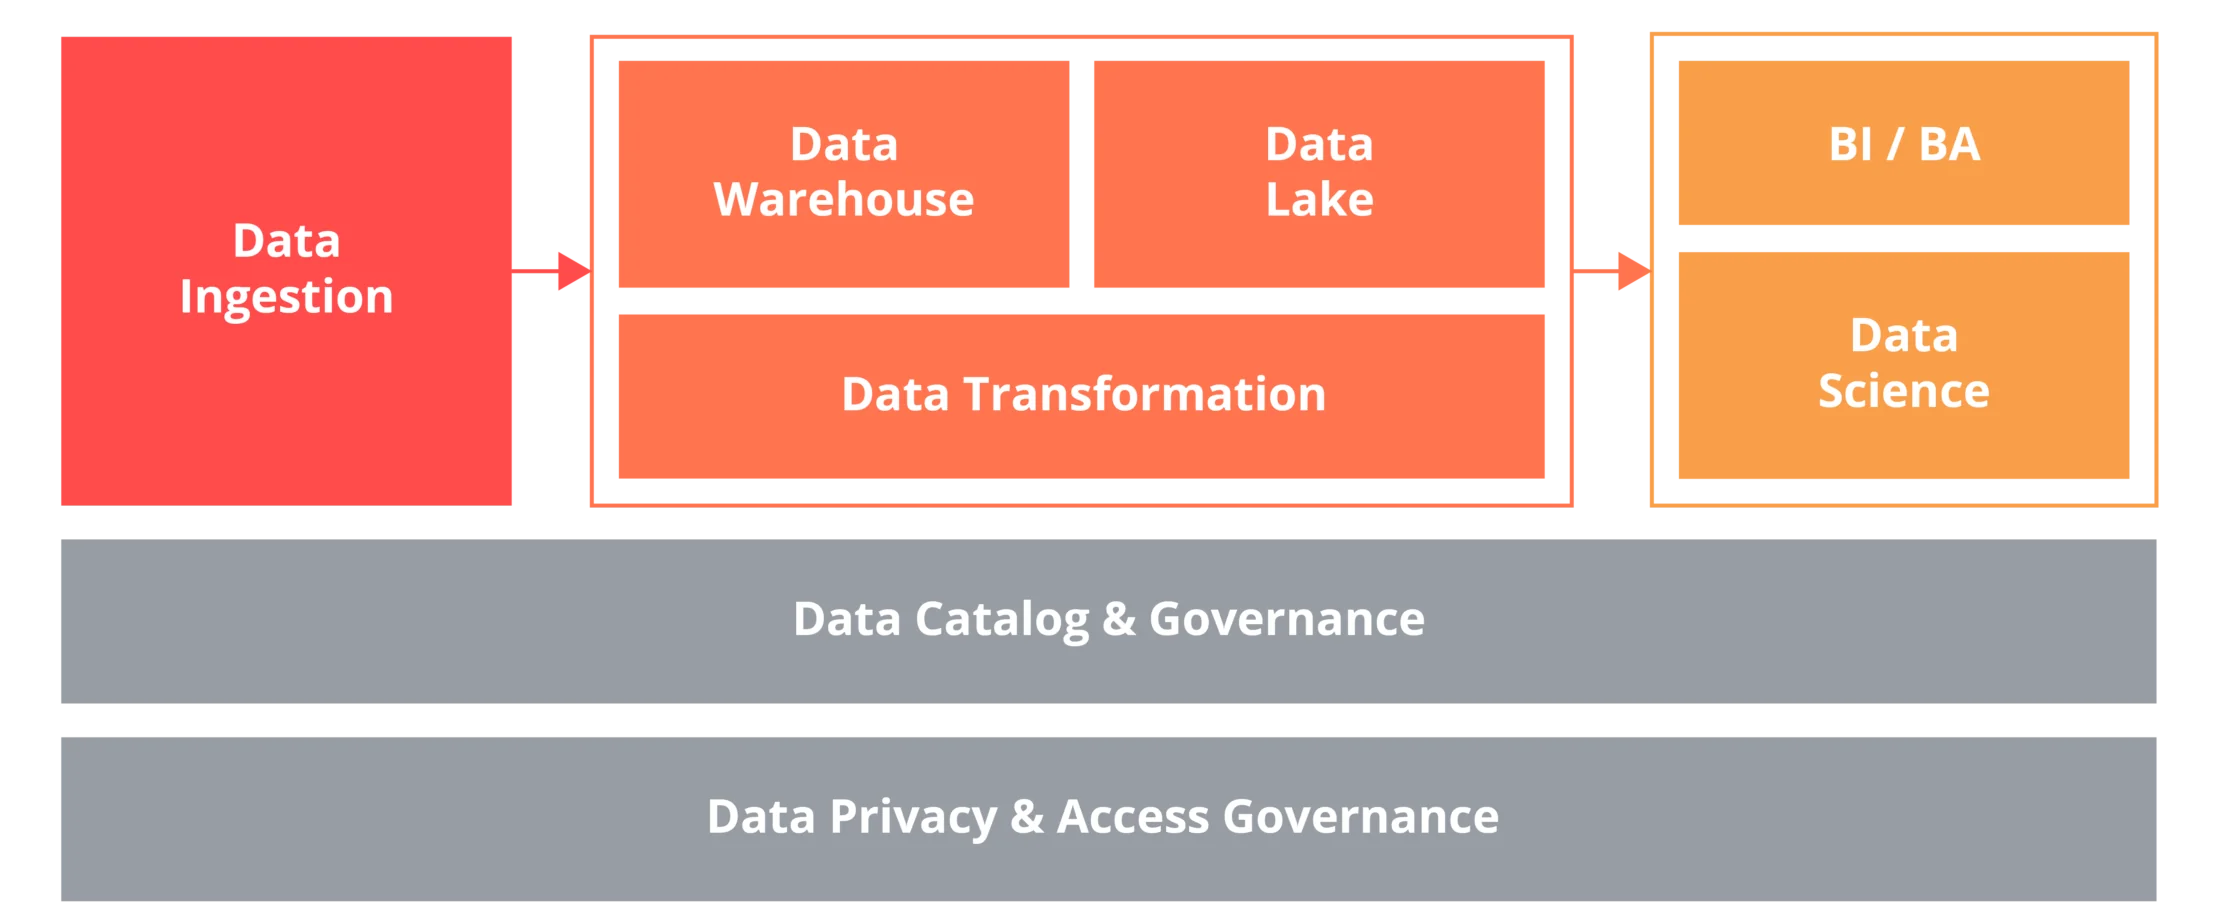 This diagram shows the data platform of Data Science.